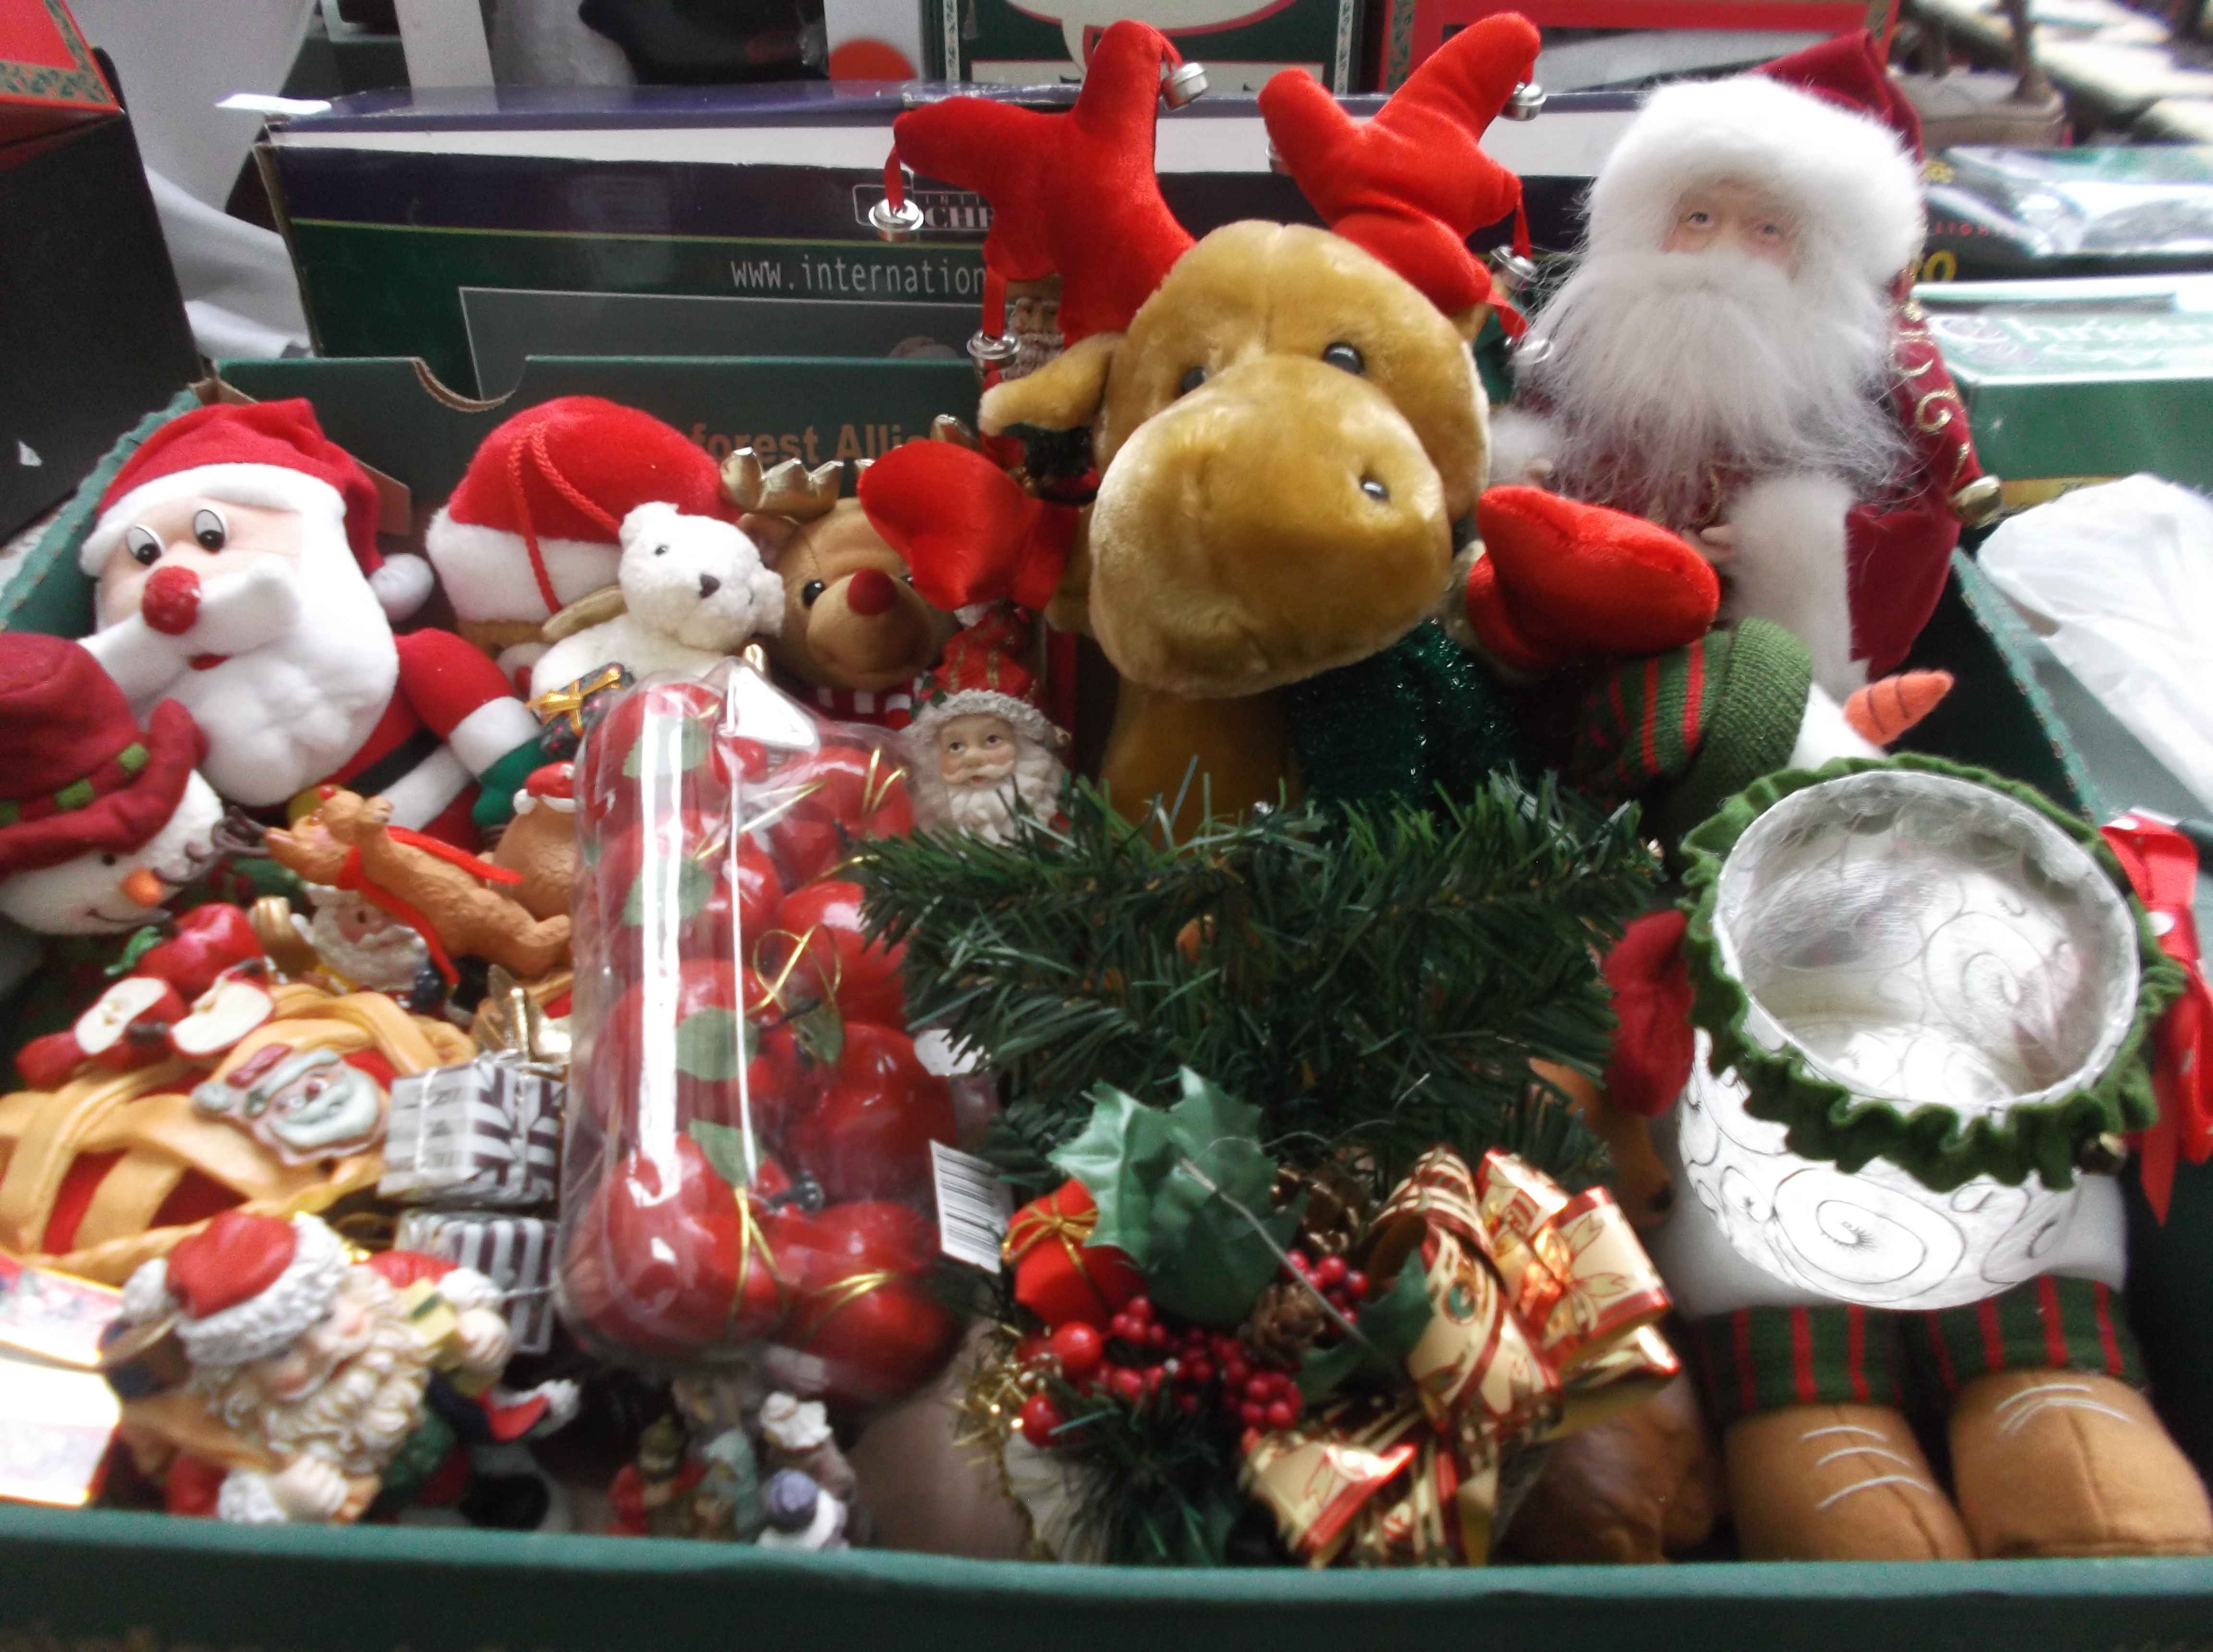 Large box of small Christmas decorations incl. felt toys, Christmas tree hangers etc.